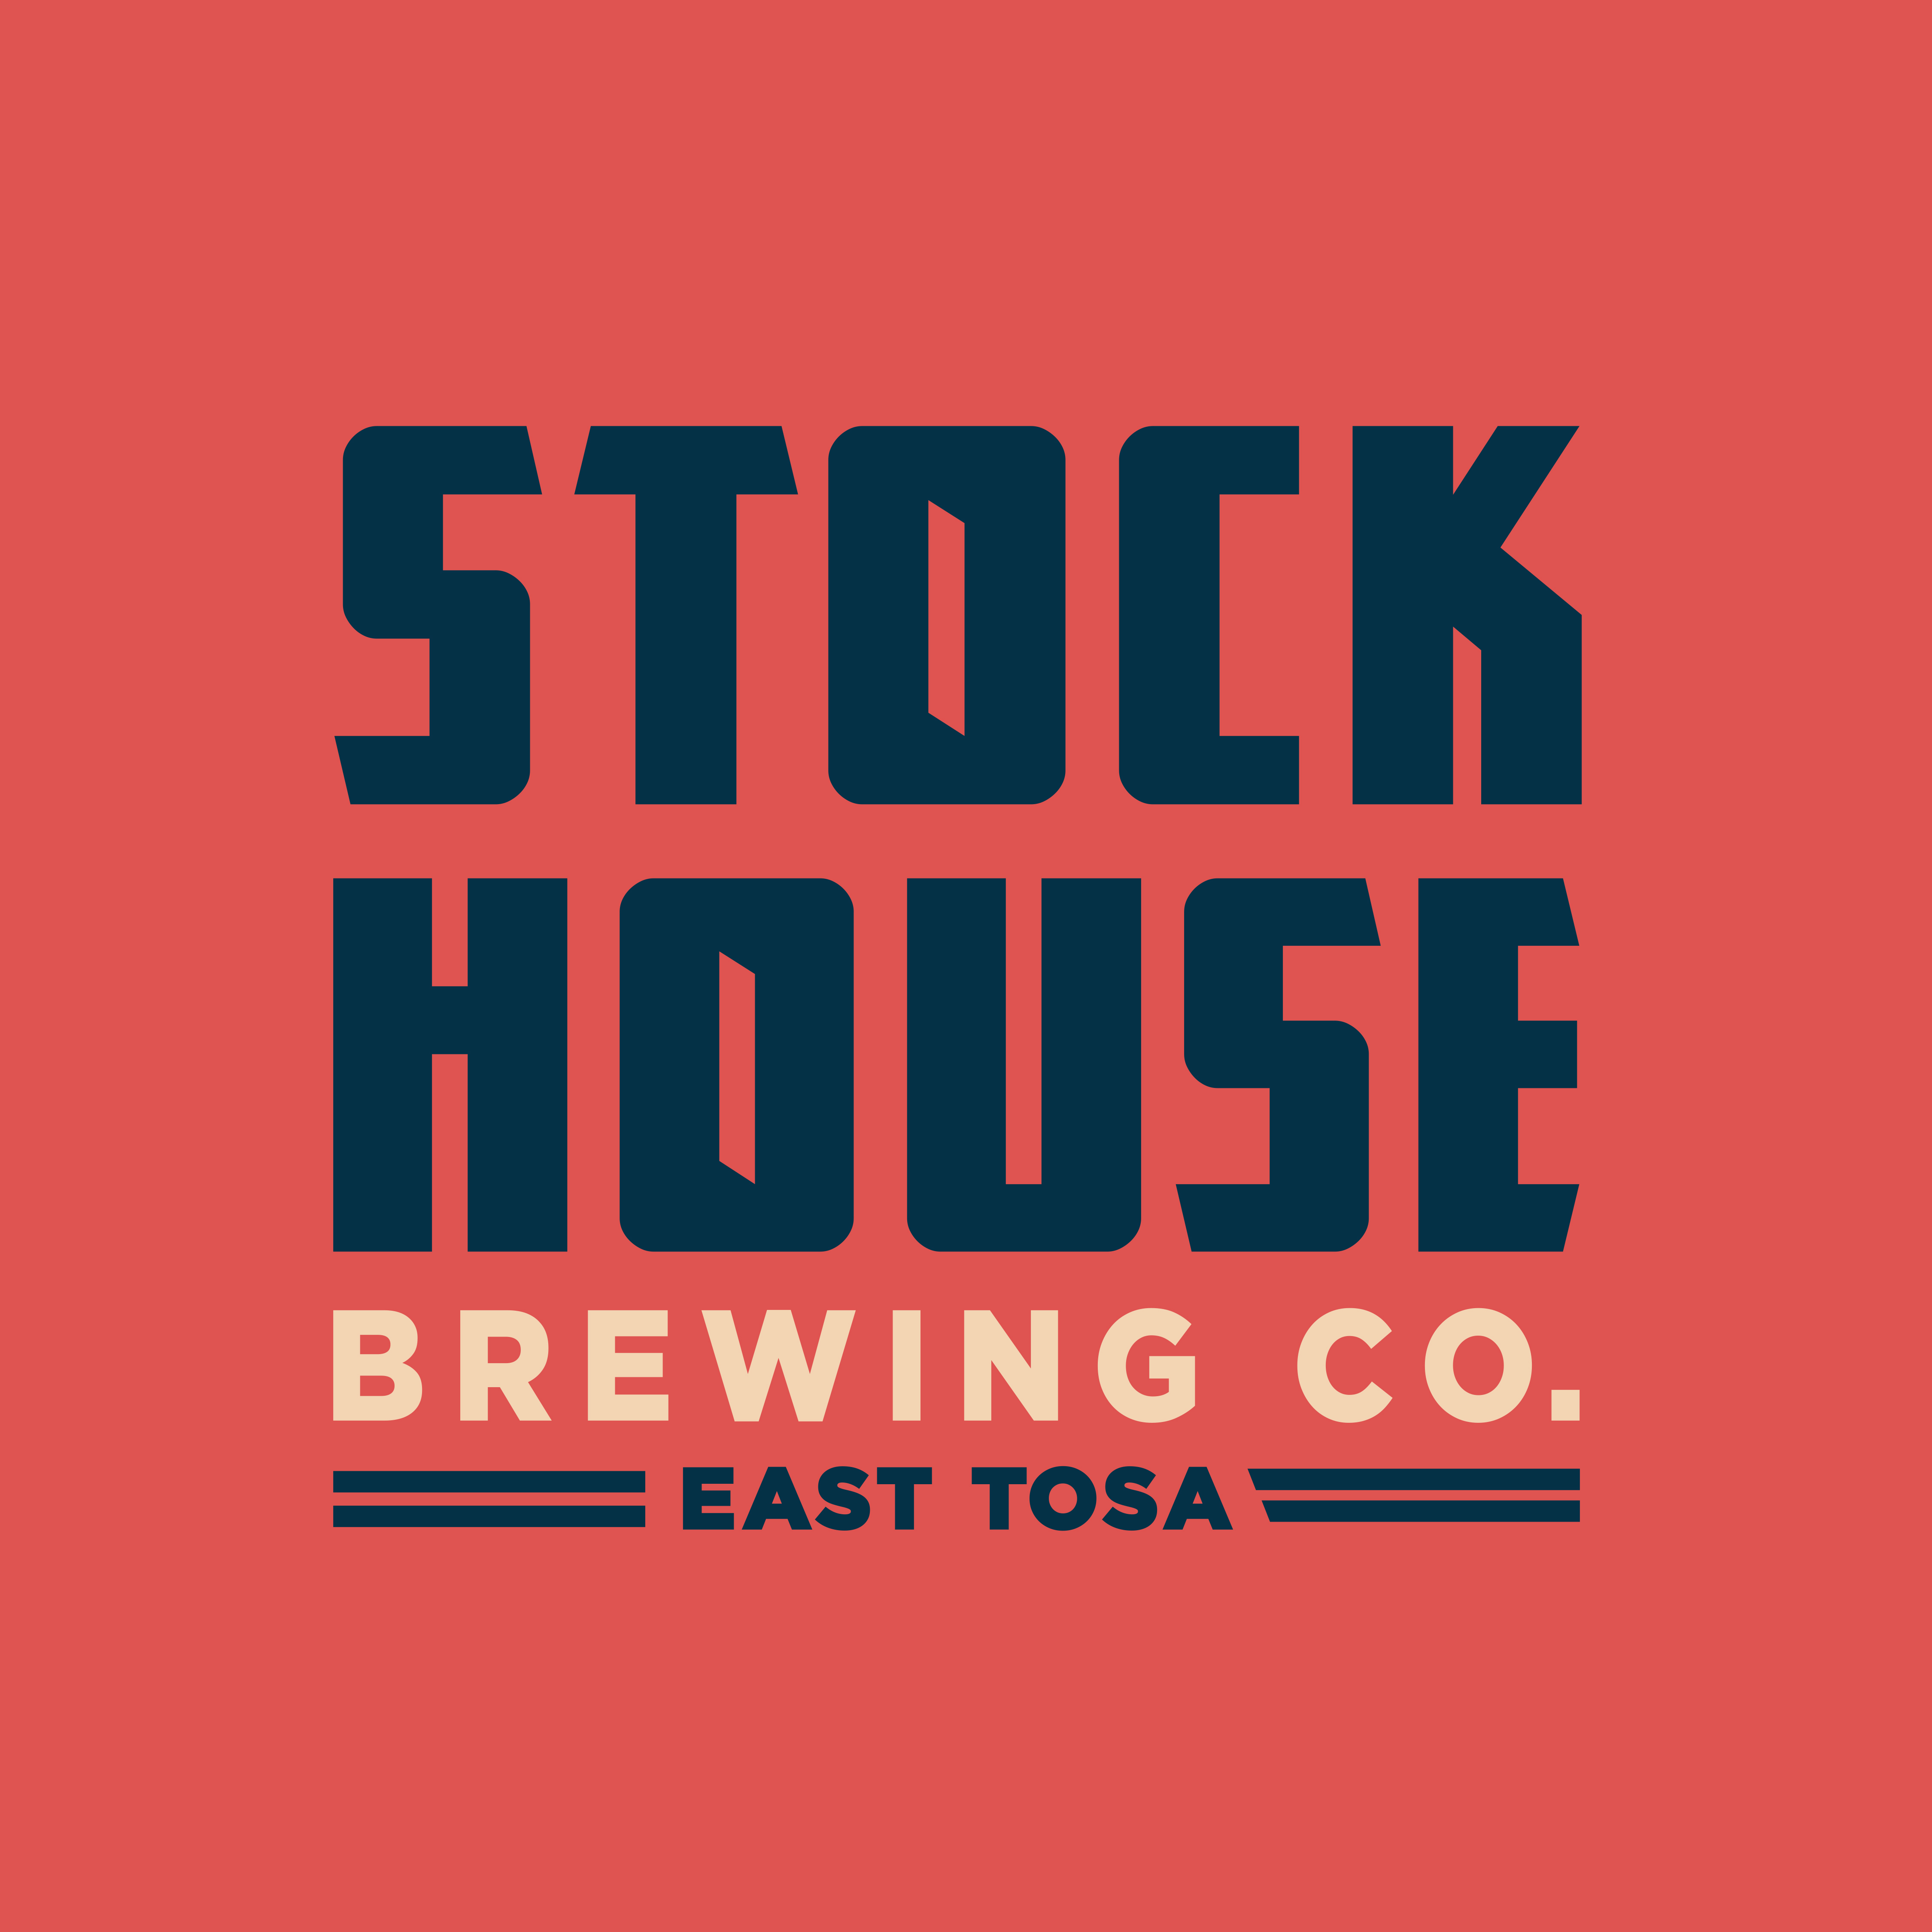 STOCK HOUSE BREWING CO